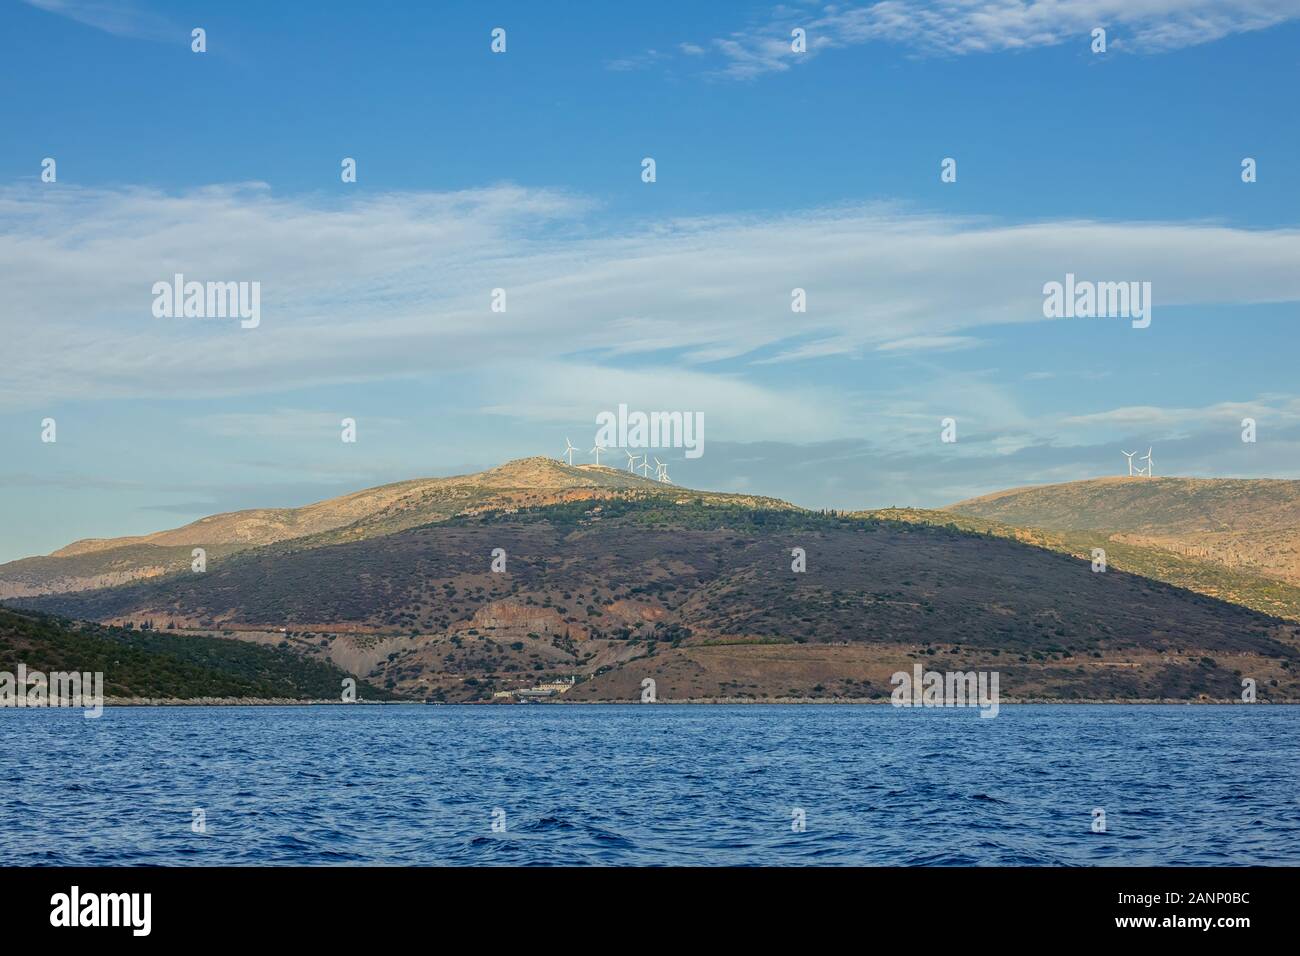 Greece. Corinthian Gulf. Hilly shores with wind farms on the peaks. View from the boat Stock Photo